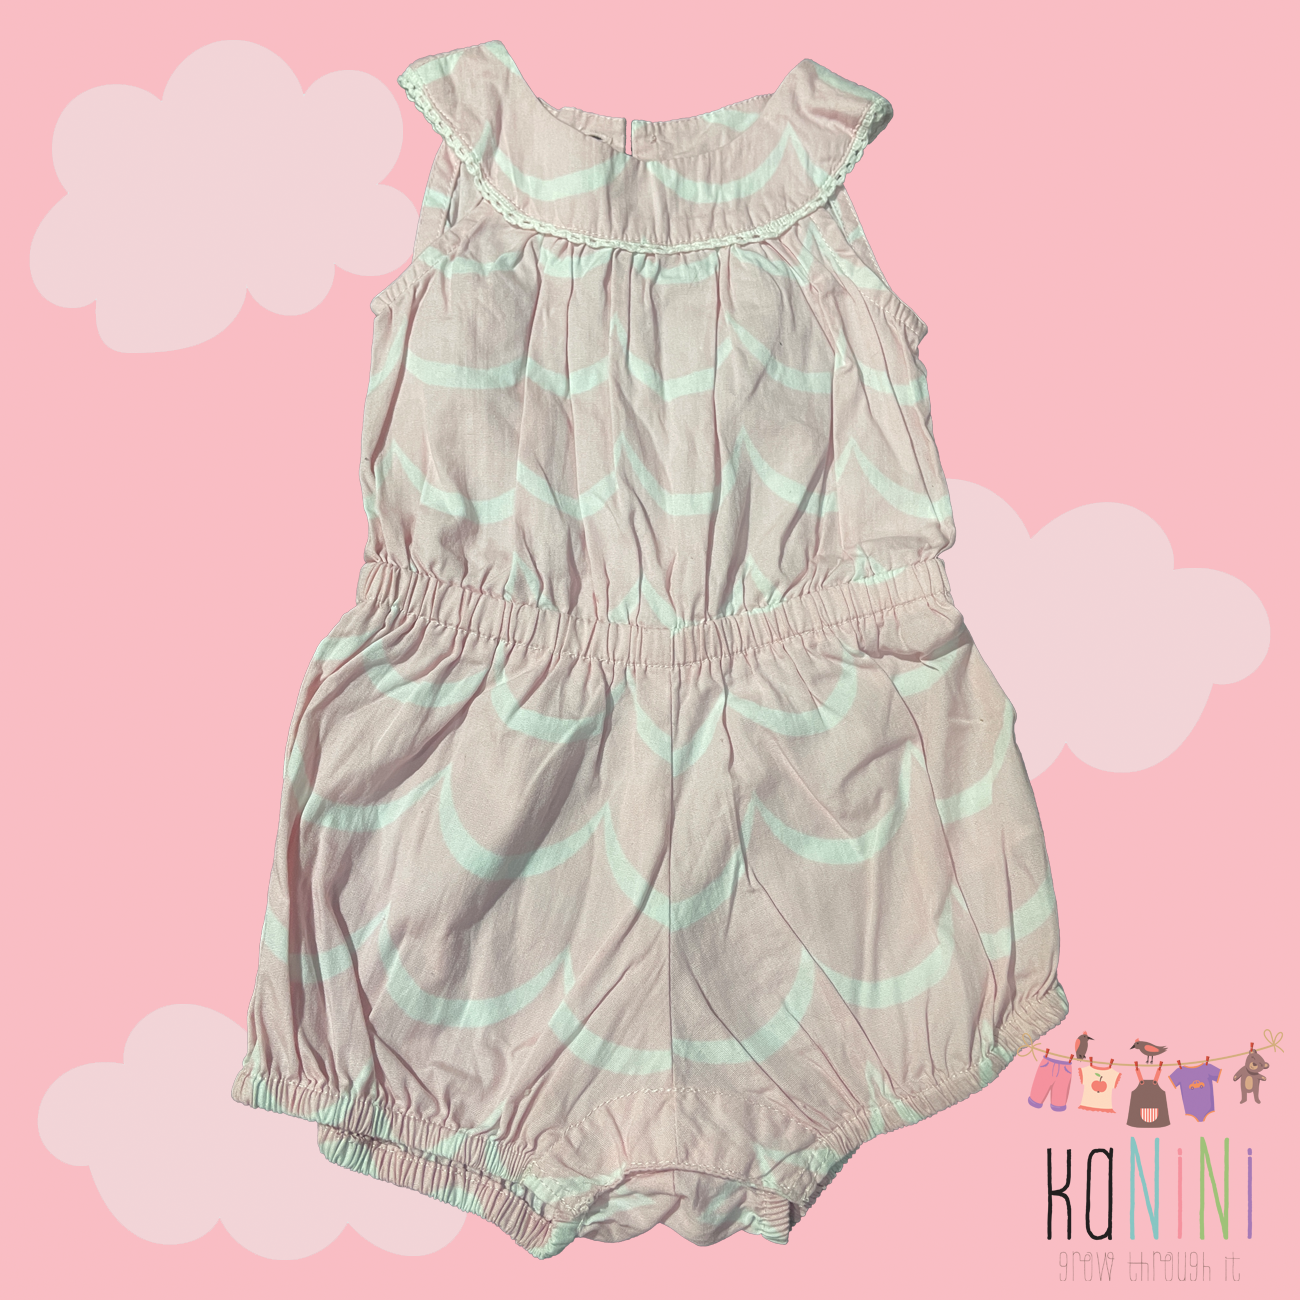 Featured image for “Earthchild Newborn Girls Pink & White Romper”